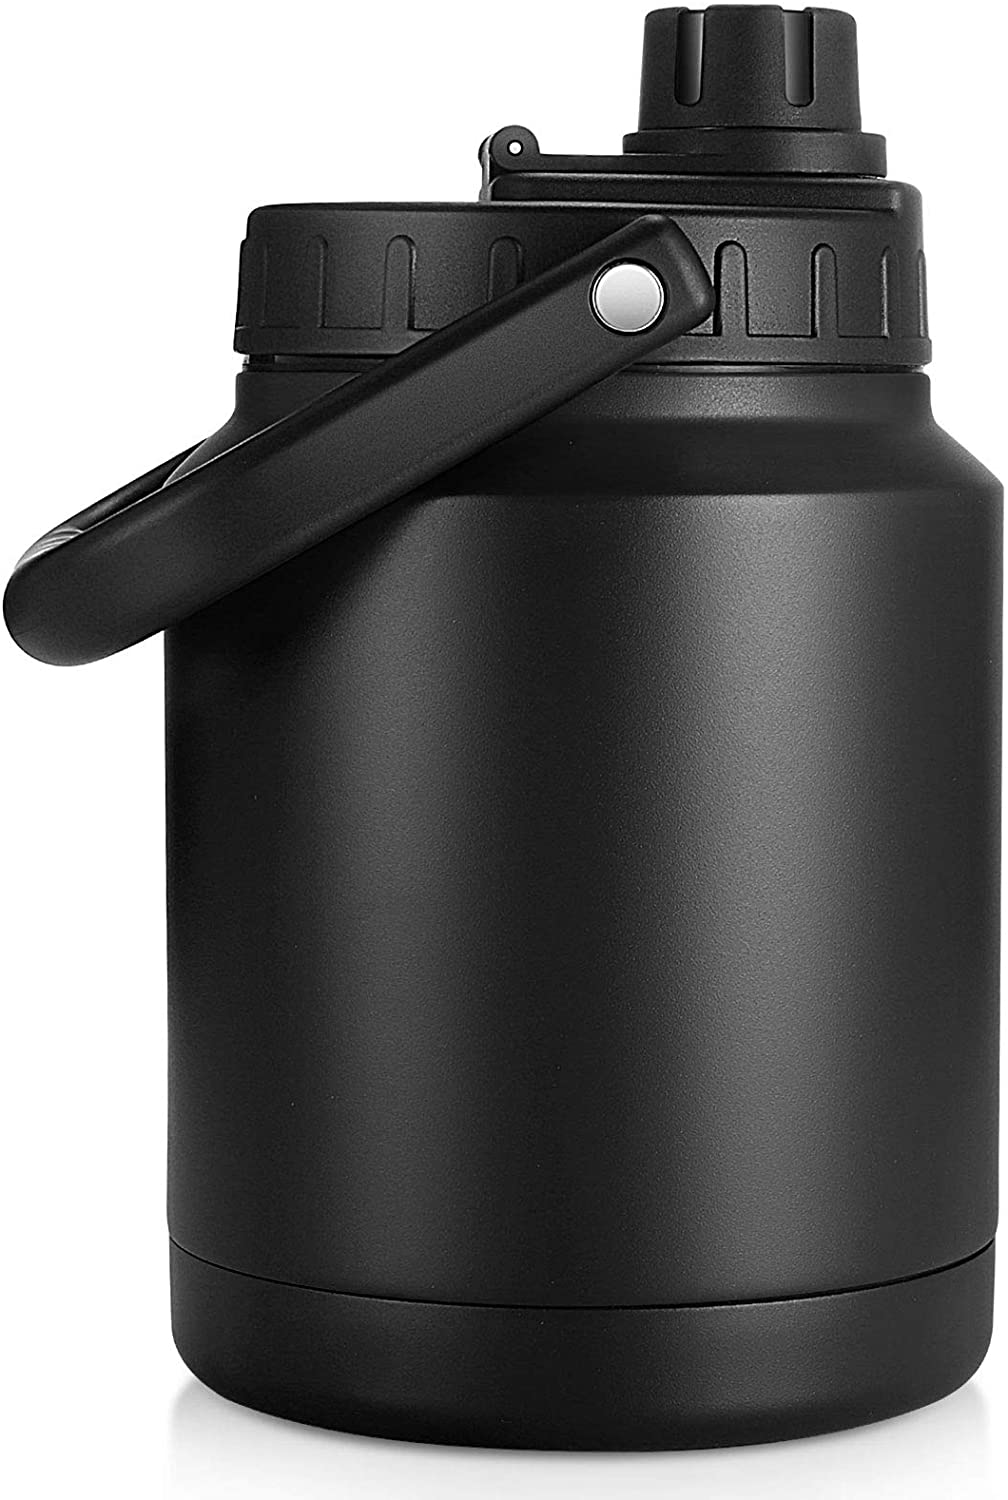 Sursip Half Gallon Vacuum Insulated Jug,Double-Walled 18/8 Food-grade Stainless Steel 64oz Water Bottle,Hot/Cold Thermo,Travel/Camping/Sports/Outdoor/Driving Choice(Black)